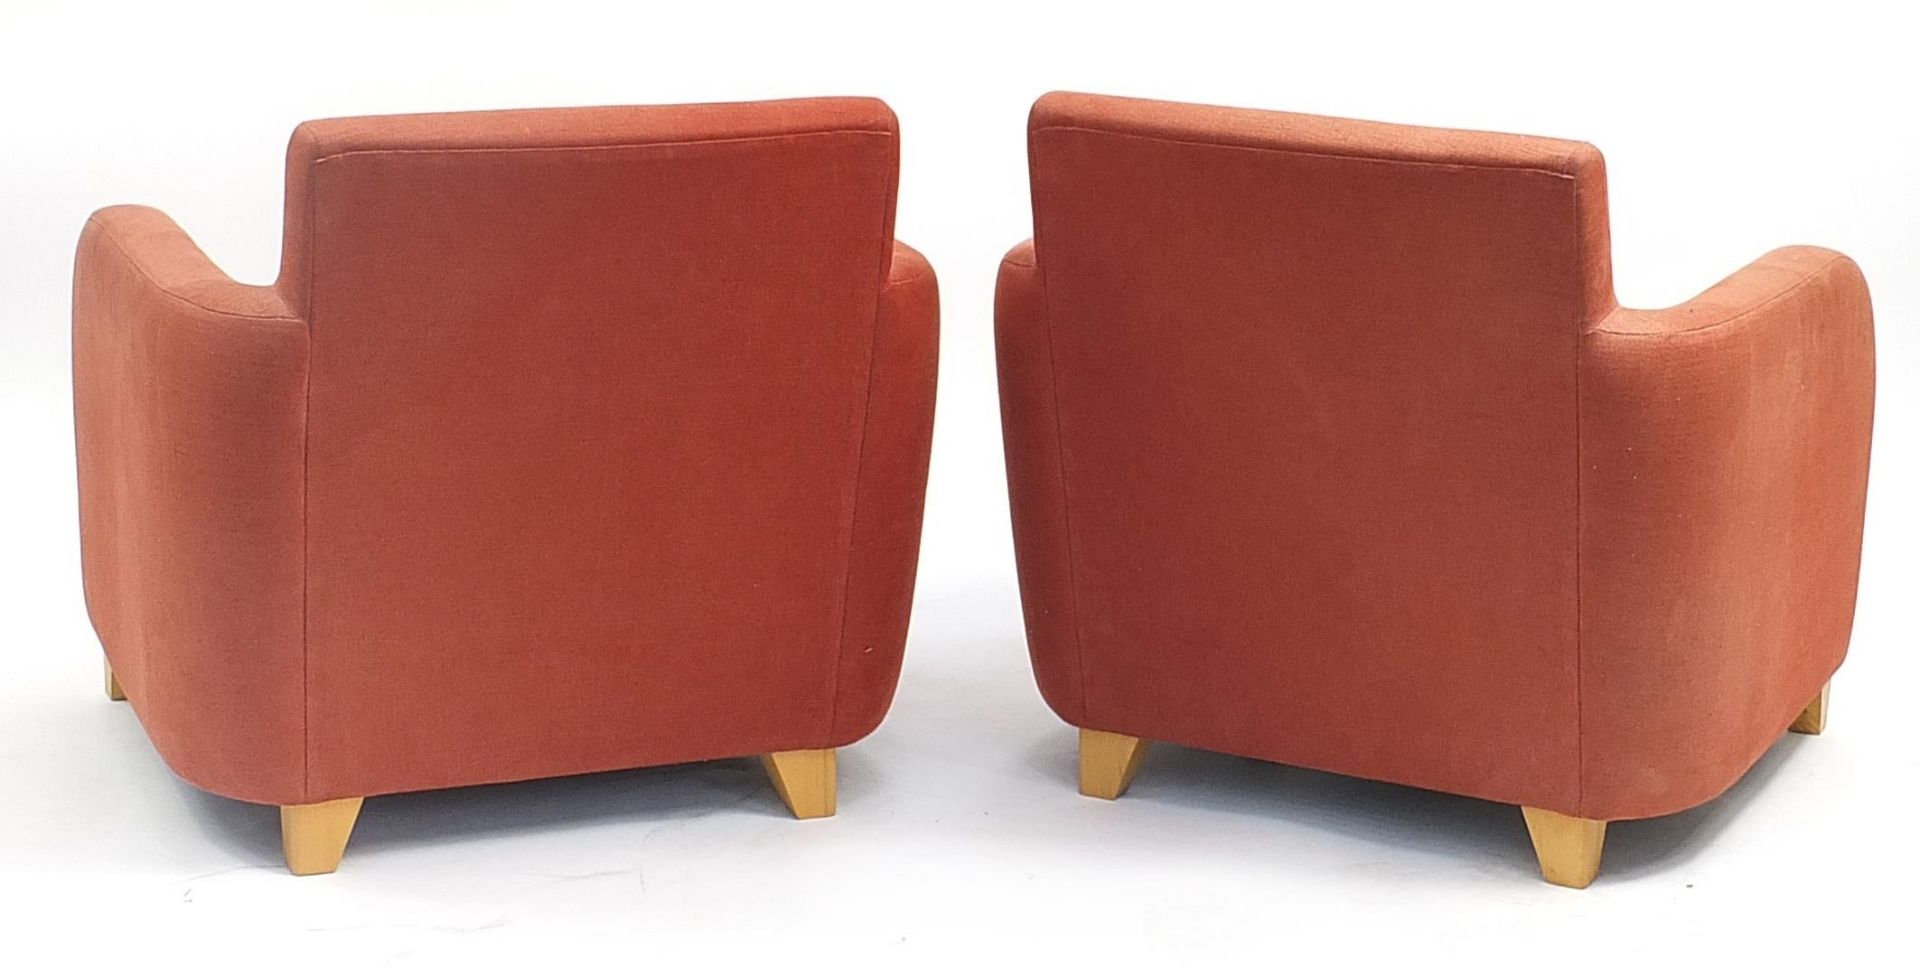 Pair of Art Deco style tub chairs with salmon upholstery, each 70cm H x 72cm W x 80cm D - Image 3 of 3